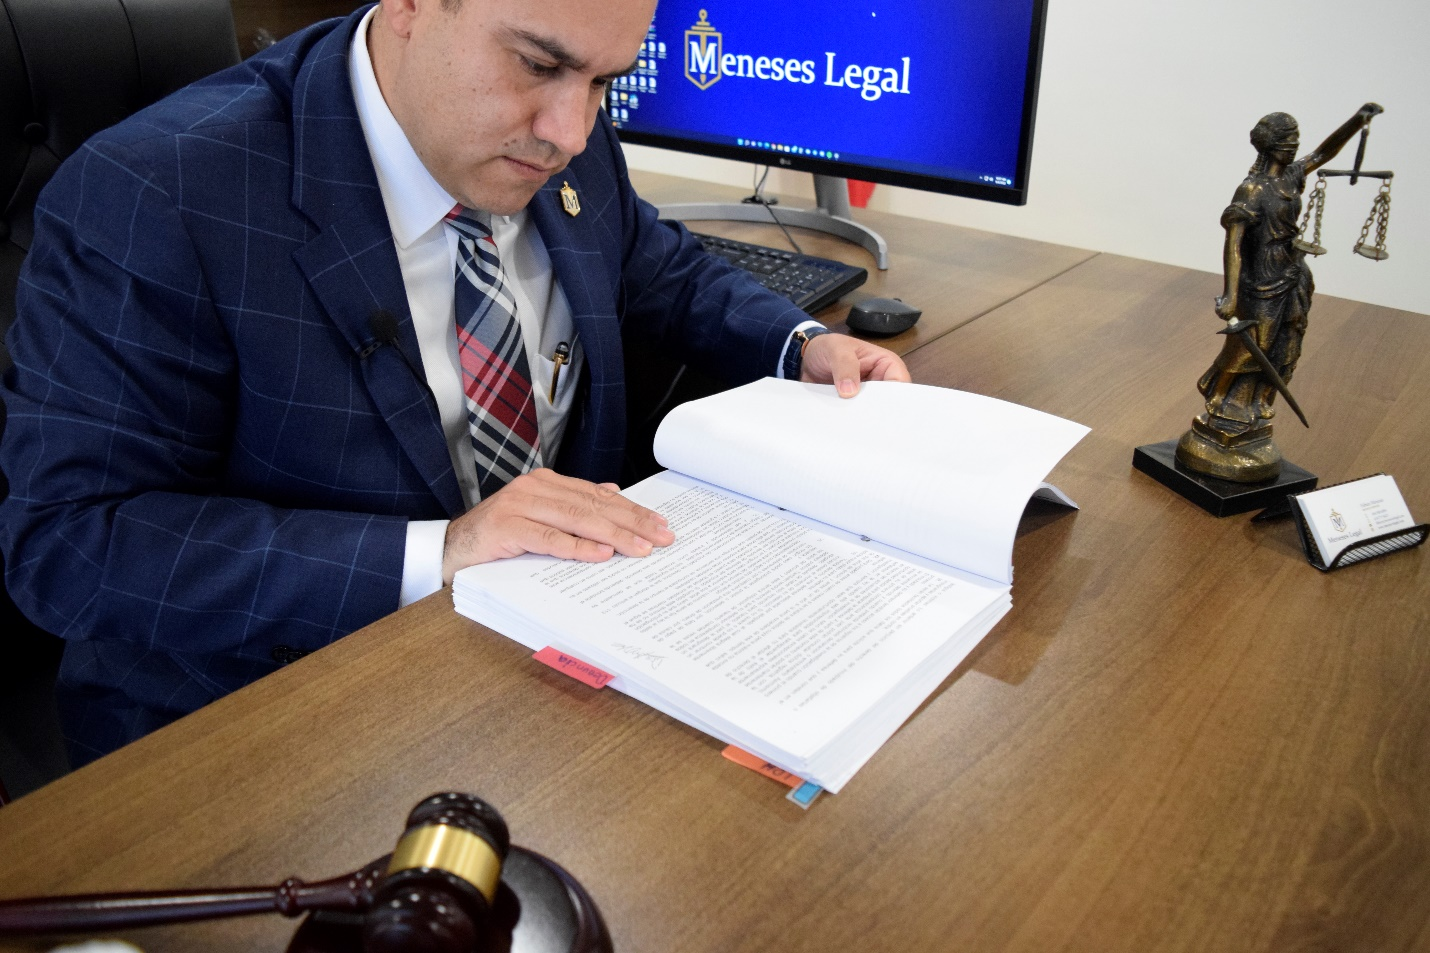 A lawyer sat at a desk reading a document next to a gavel and a computer